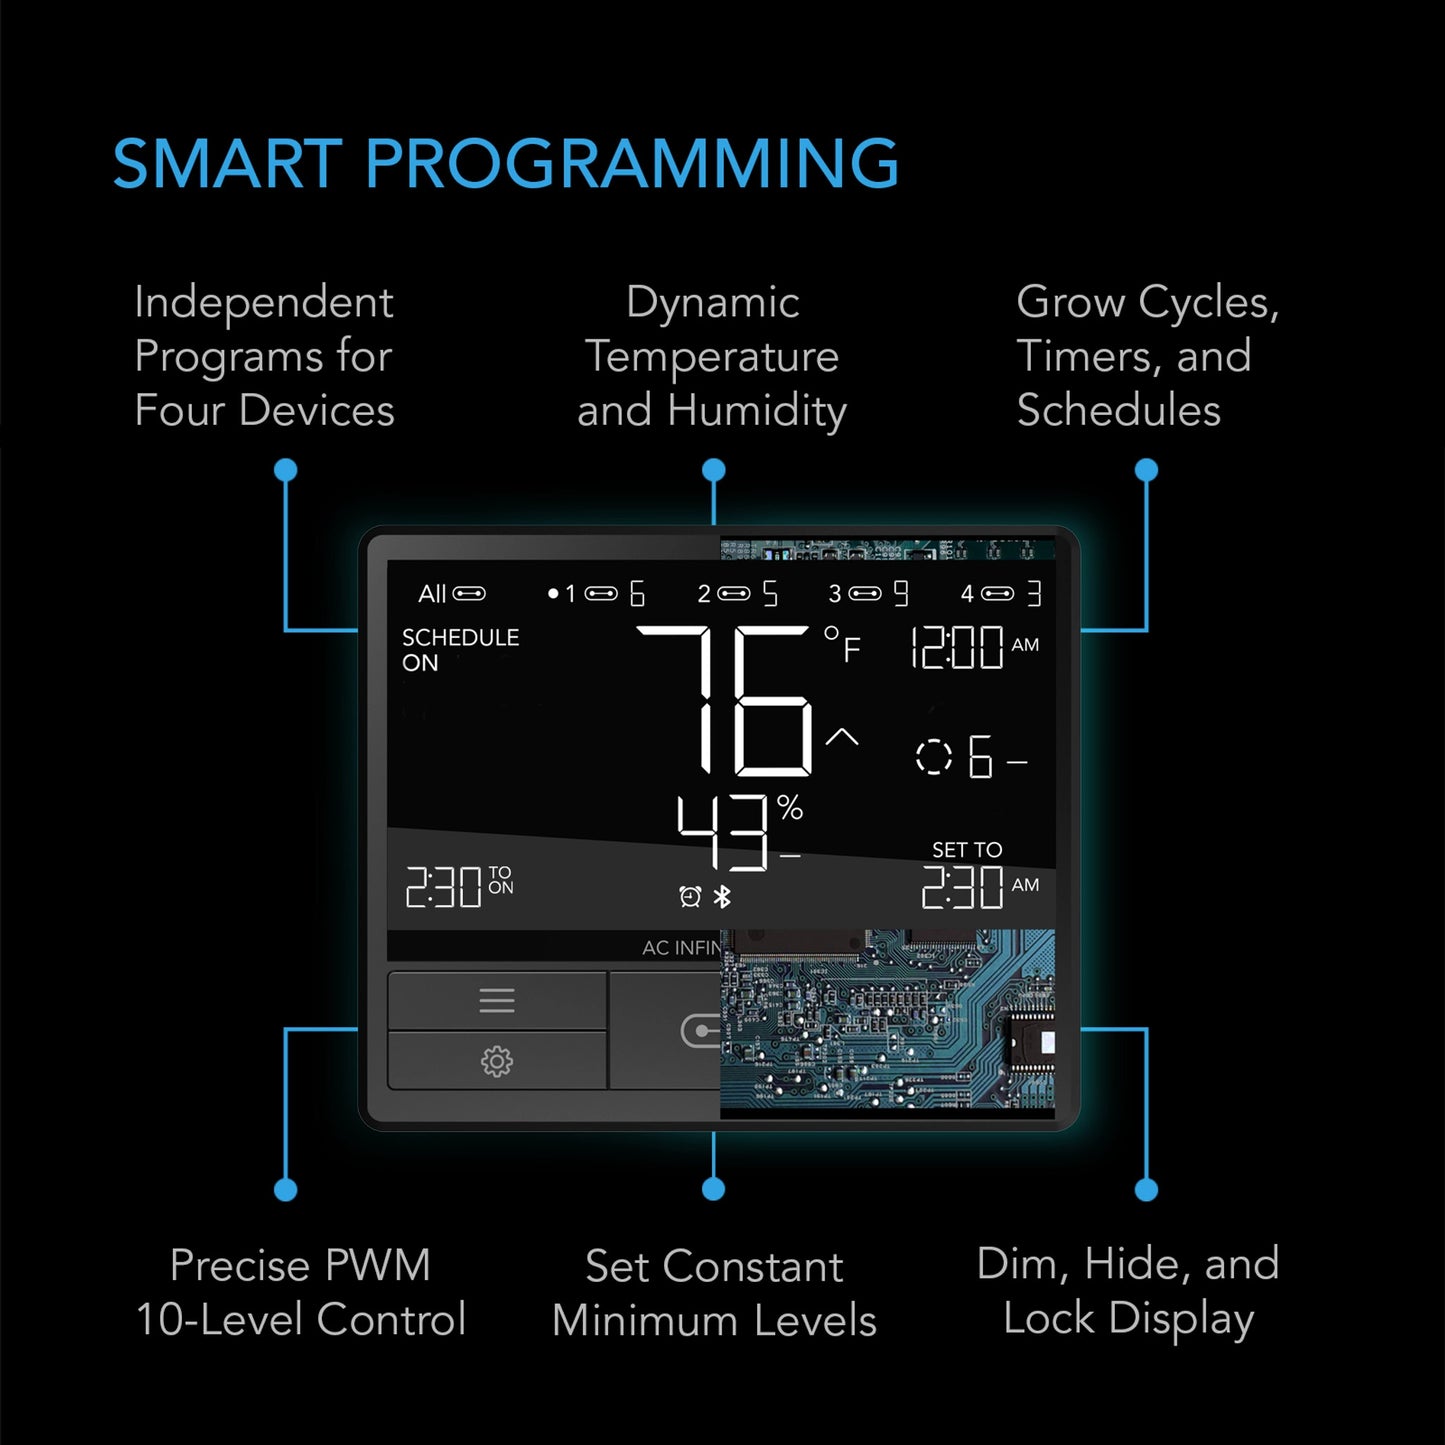 Controller 69, Independent Programs for Four Devices, Dynamic Temperature, Humidity, Scheduling, Cycles, Levels Control, Data App